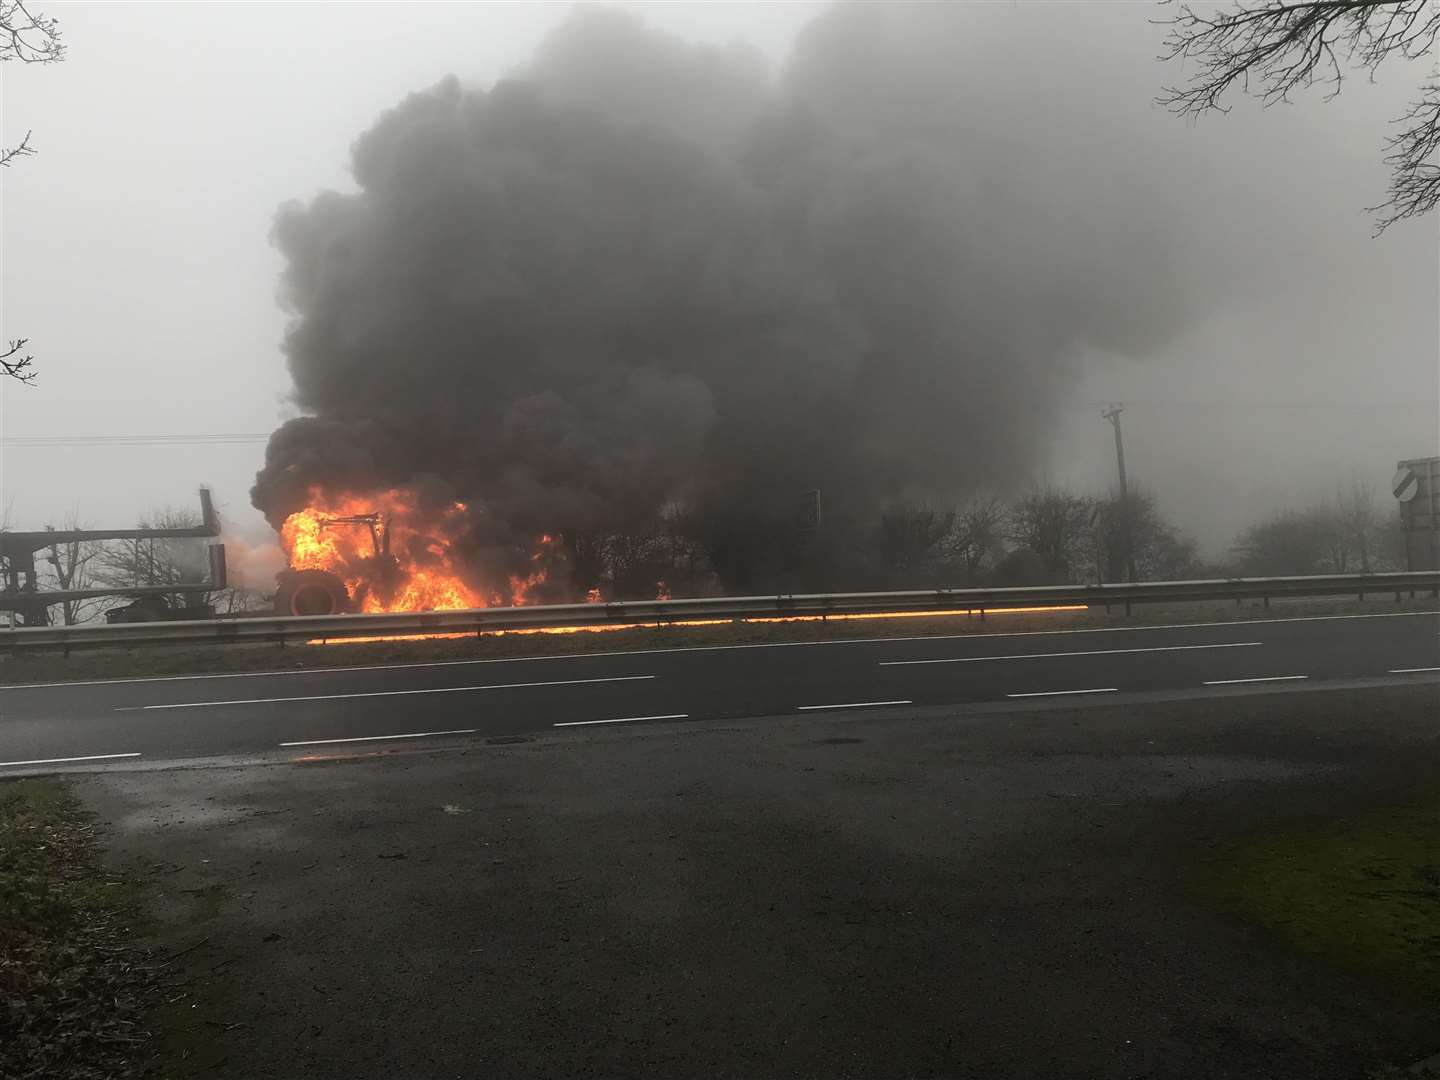 A tractor was engulfed in flames (6785758)